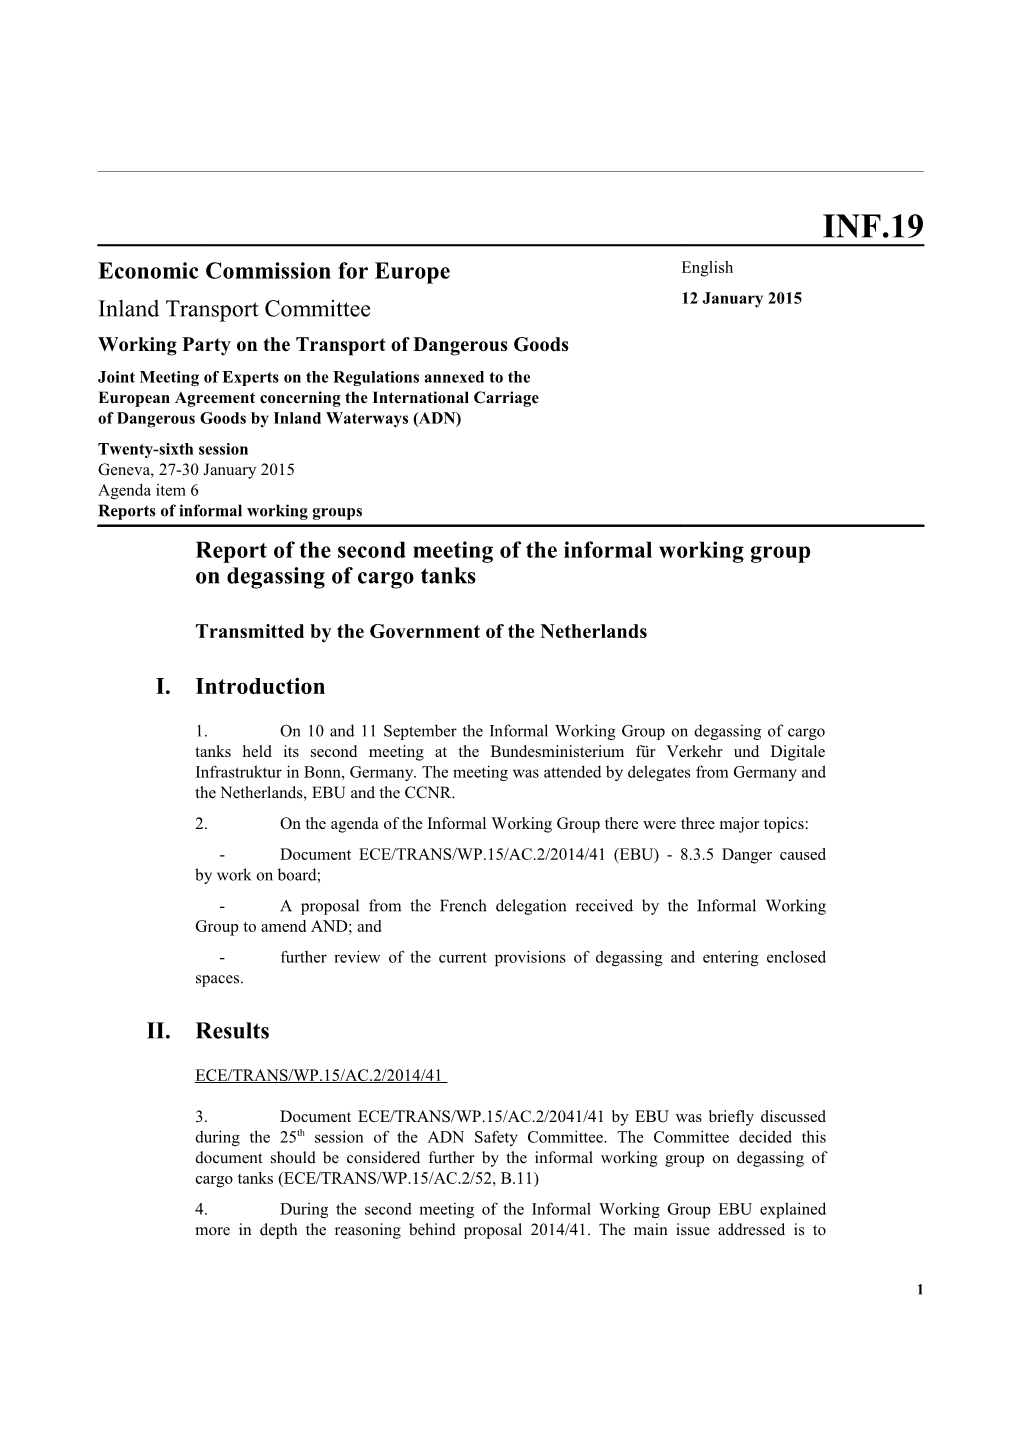 Report of the Second Meeting of the Informal Working Group on Degassing of Cargo Tanks